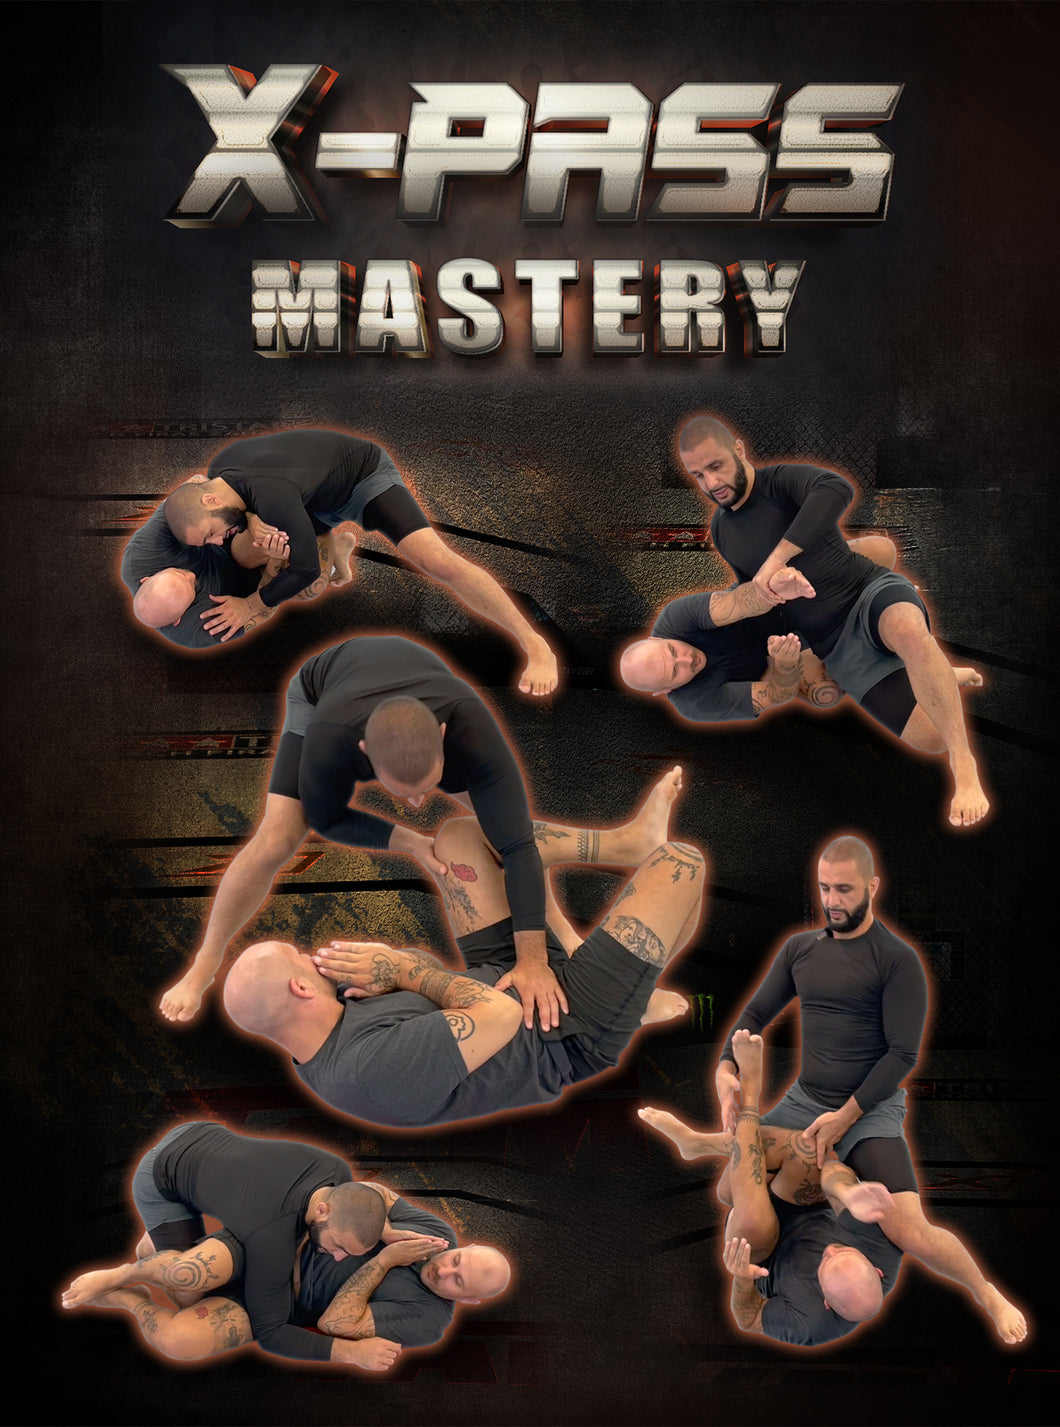 X-Pass Mastery | Must Have!